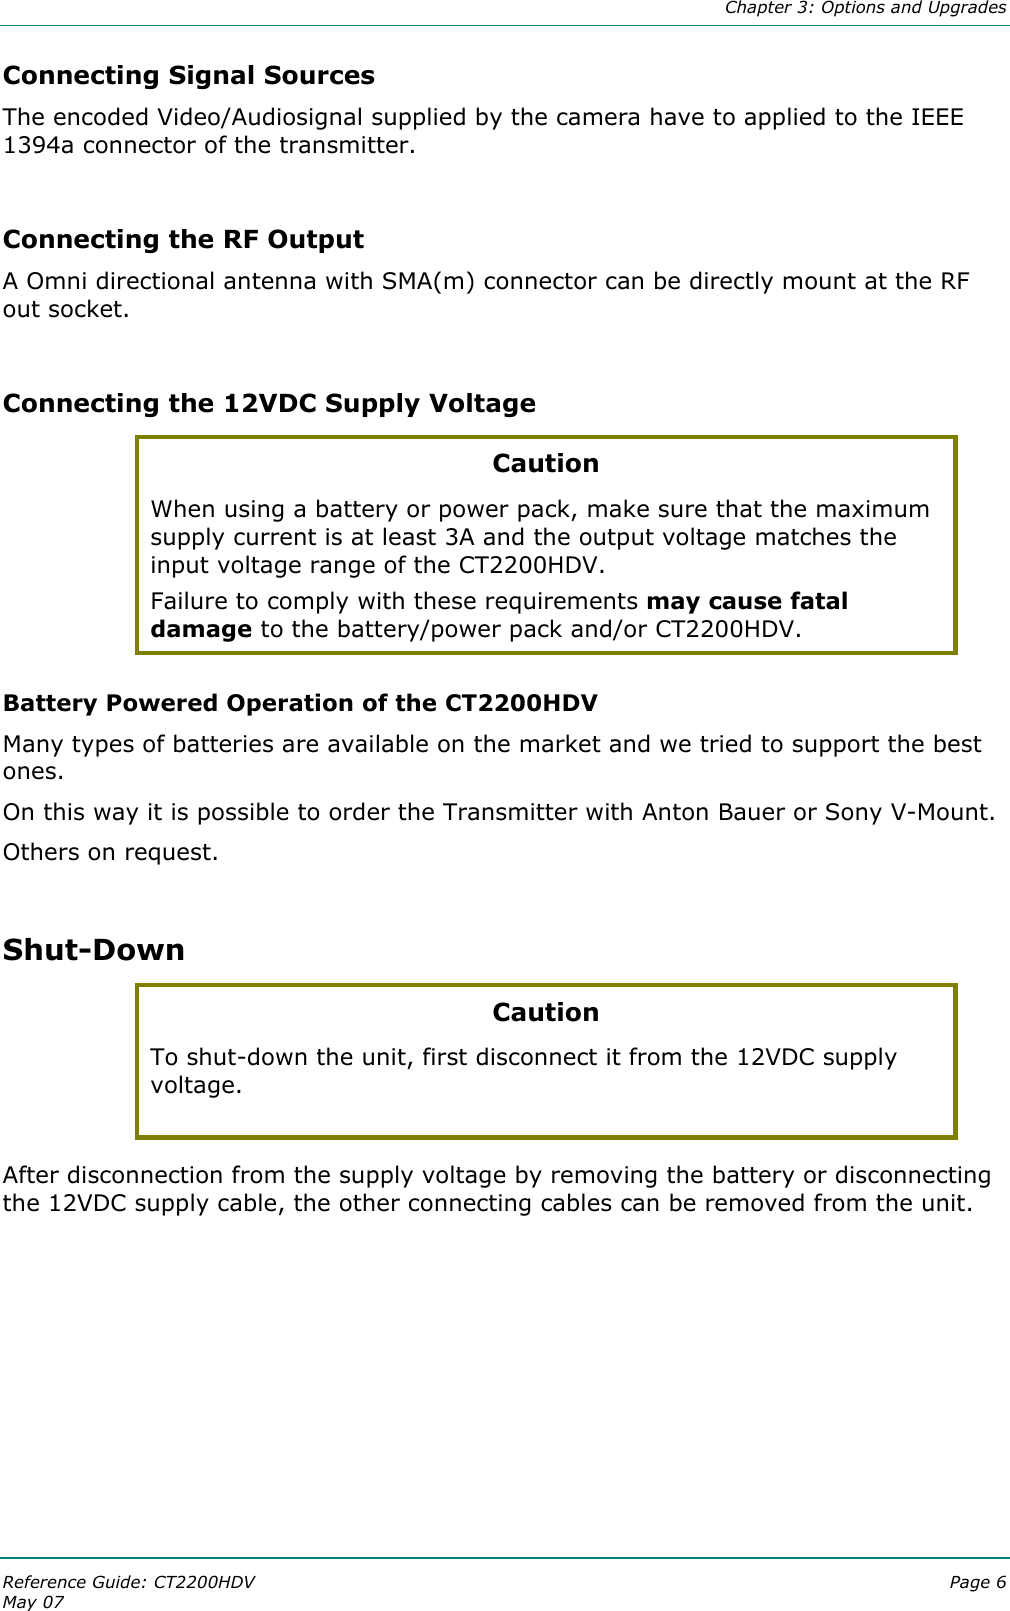  Chapter 3: Options and Upgrades Reference Guide: CT2200HDV  Page 6 May 07   Connecting Signal Sources The encoded Video/Audiosignal supplied by the camera have to applied to the IEEE 1394a connector of the transmitter.  Connecting the RF Output A Omni directional antenna with SMA(m) connector can be directly mount at the RF out socket.  Connecting the 12VDC Supply Voltage Caution When using a battery or power pack, make sure that the maximum supply current is at least 3A and the output voltage matches the input voltage range of the CT2200HDV.  Failure to comply with these requirements may cause fatal damage to the battery/power pack and/or CT2200HDV. Battery Powered Operation of the CT2200HDV  Many types of batteries are available on the market and we tried to support the best ones.  On this way it is possible to order the Transmitter with Anton Bauer or Sony V-Mount.  Others on request.  Shut-Down Caution To shut-down the unit, first disconnect it from the 12VDC supply voltage.  After disconnection from the supply voltage by removing the battery or disconnecting the 12VDC supply cable, the other connecting cables can be removed from the unit.   